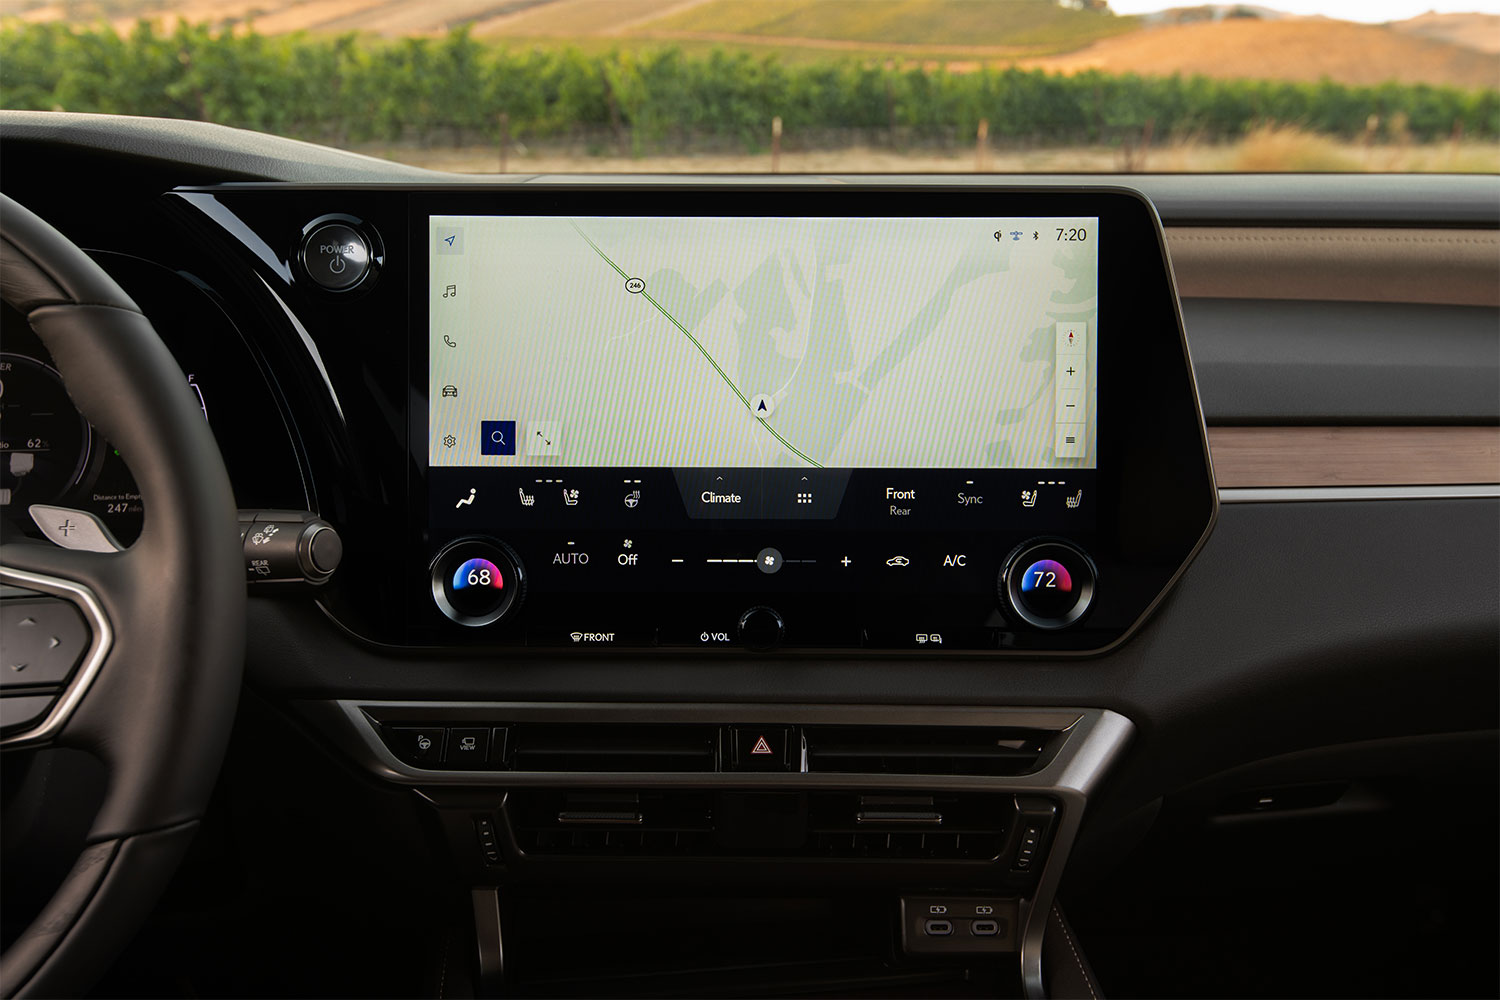 The infotainment touchscreen on the 2023 Lexus RX 350h